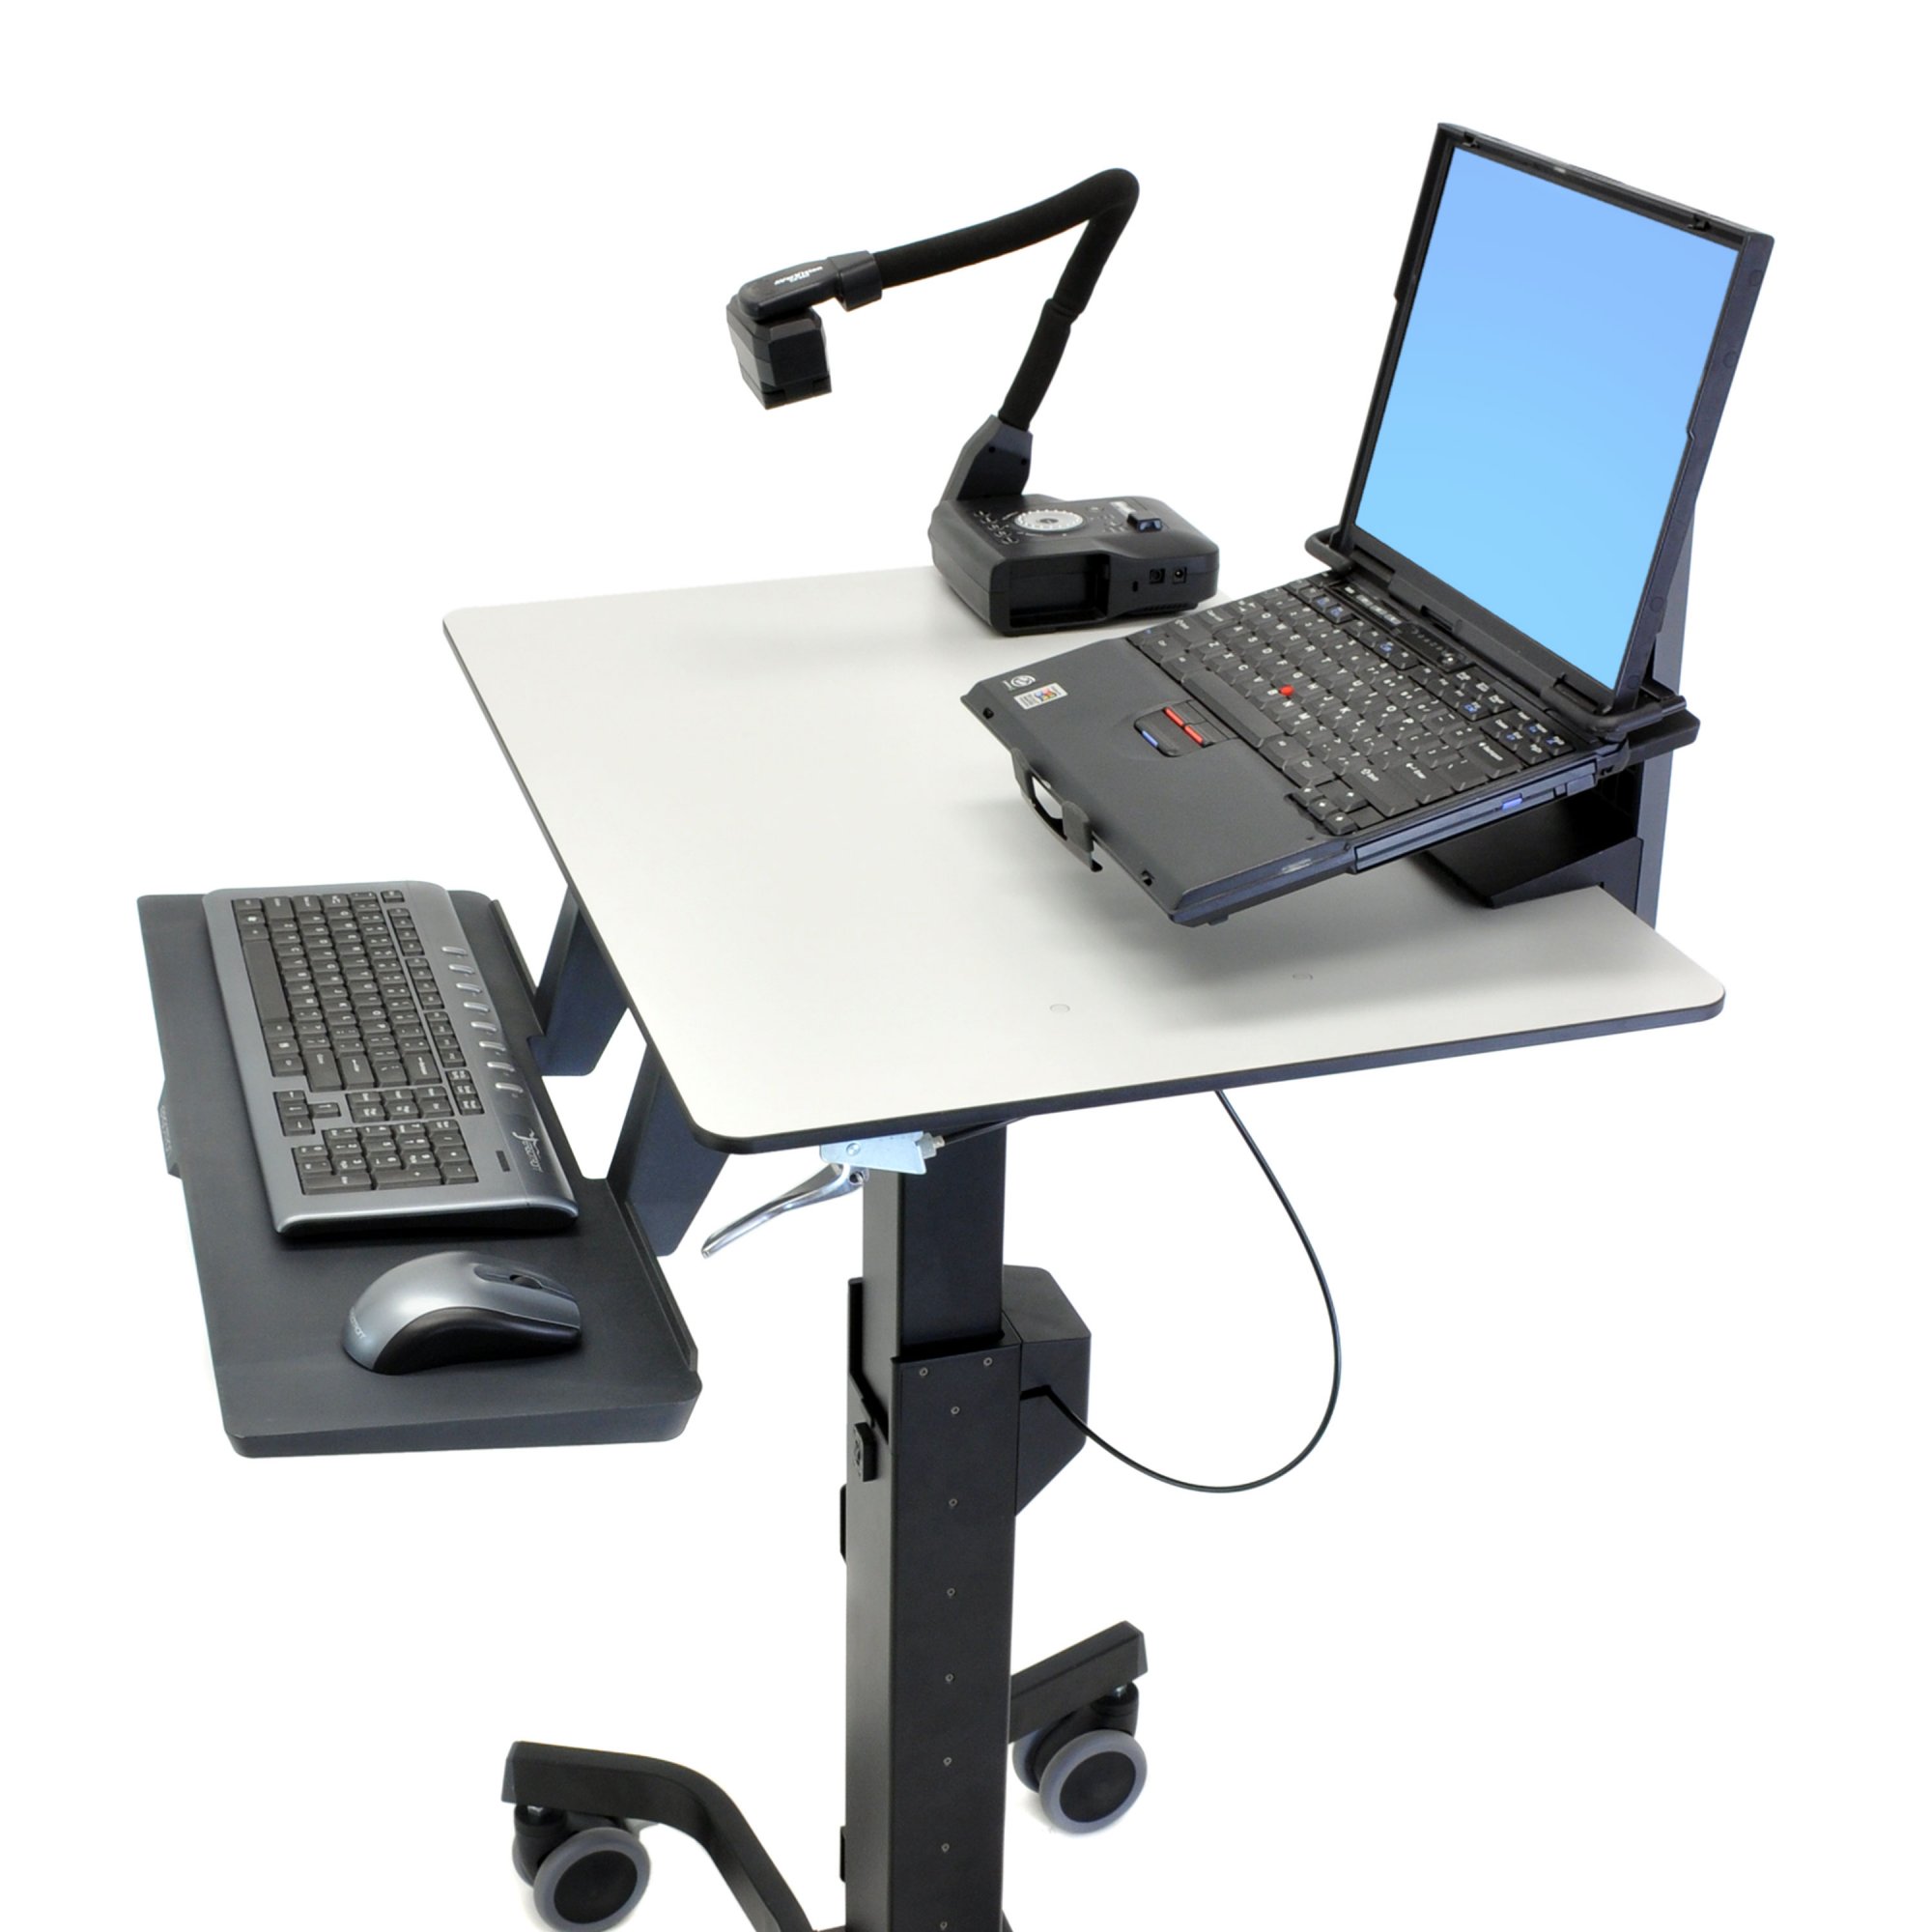 Ergotron 97-585 Laptop Kit with Notebook on TeachWell MDW Mobile Digital Workspace